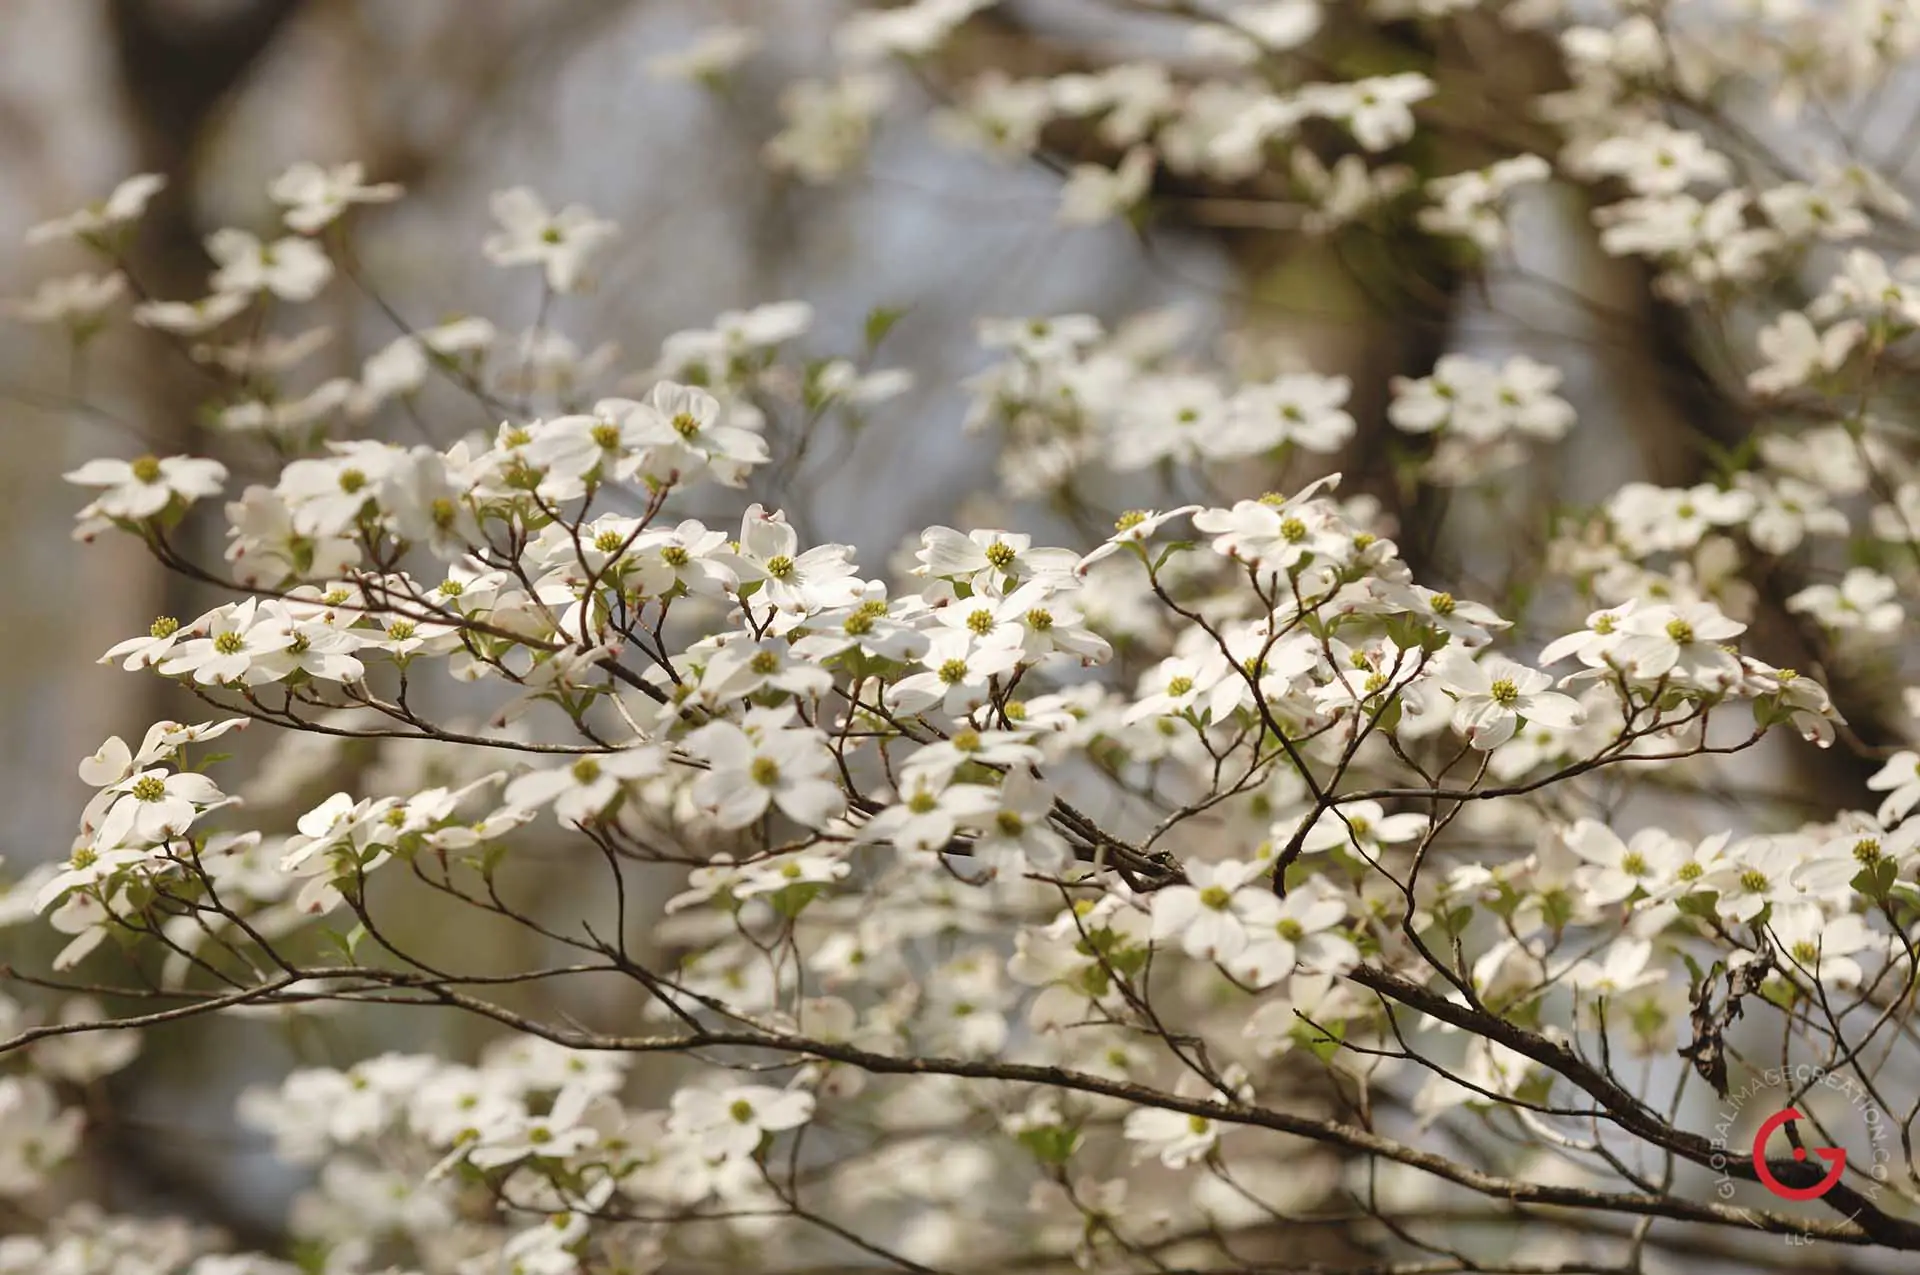 A cluster of white dogwood flowers bloom in the spring. - Advertising photographers in Branson Missouri, Branson Missouri photography